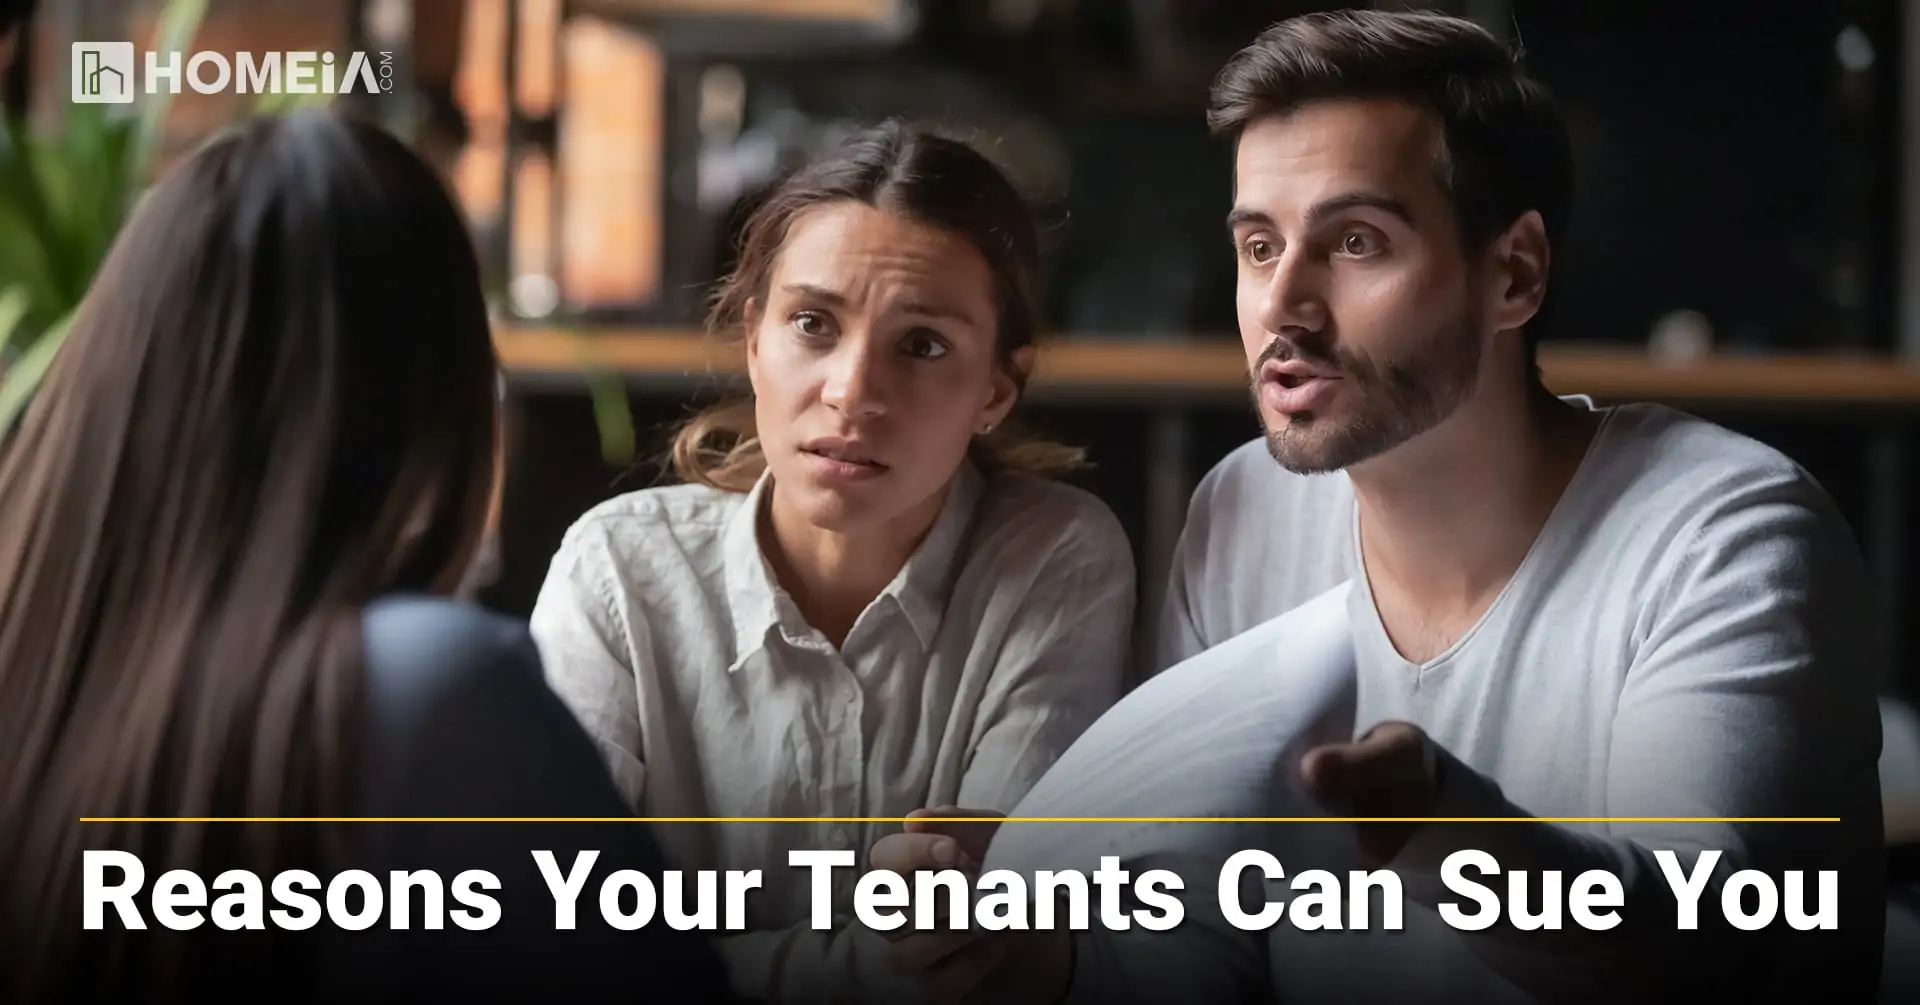 10 Reasons Your Tenants Can Sue You